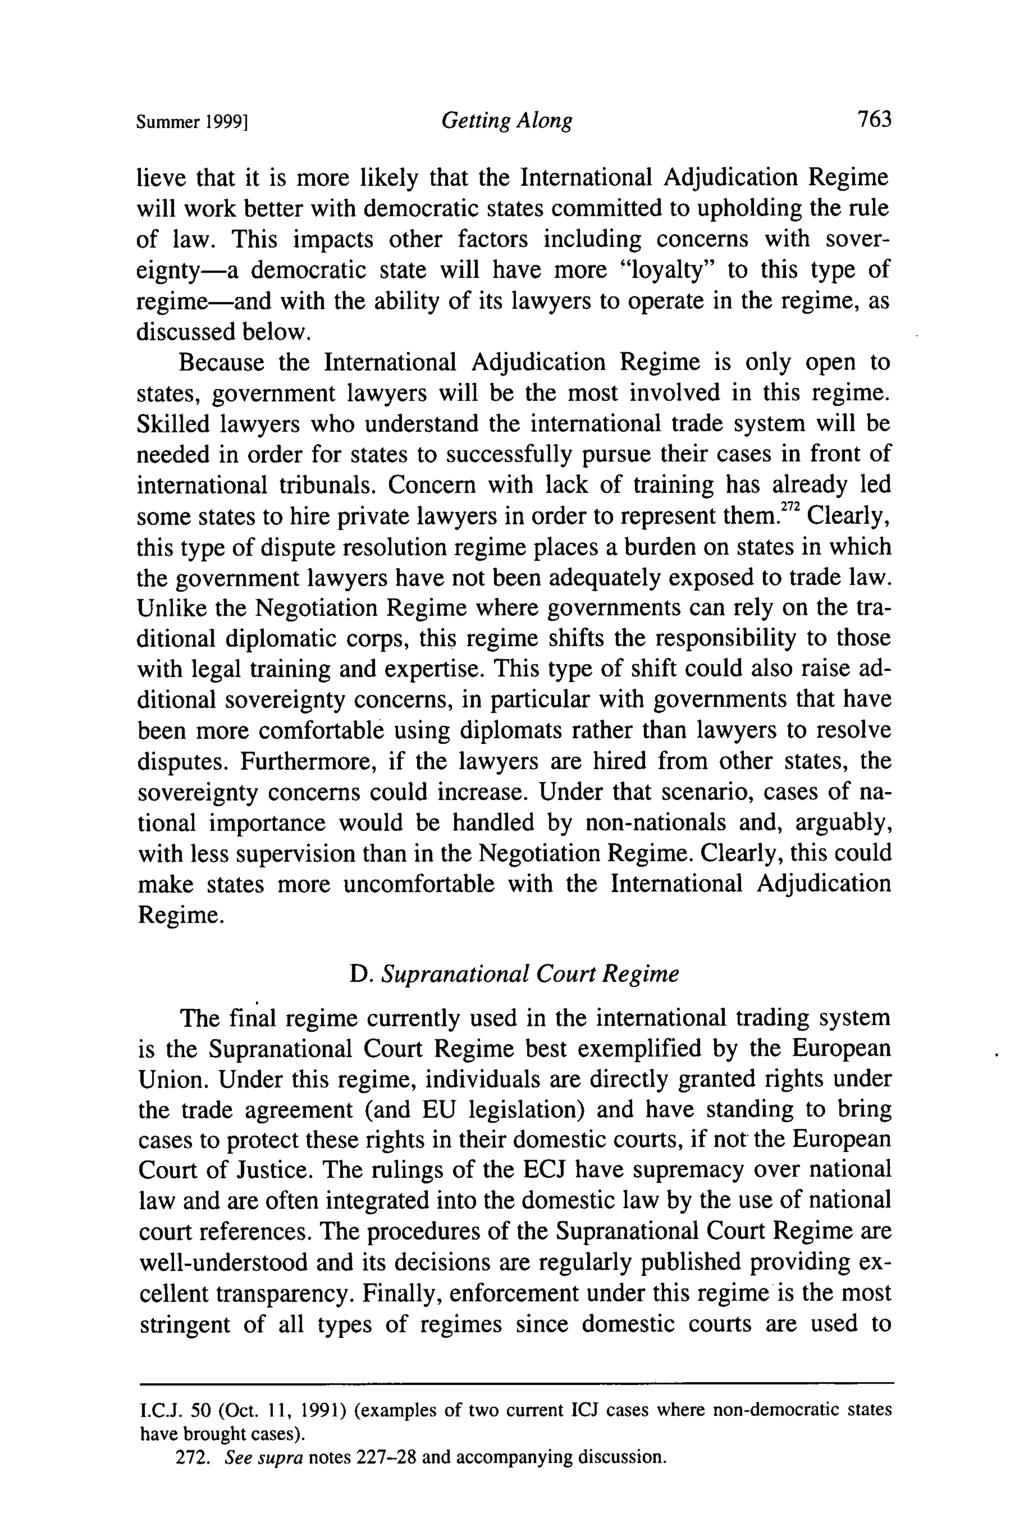 Summer 1999] Getting Along lieve that it is more likely that the International Adjudication Regime will work better with democratic states committed to upholding the rule of law.